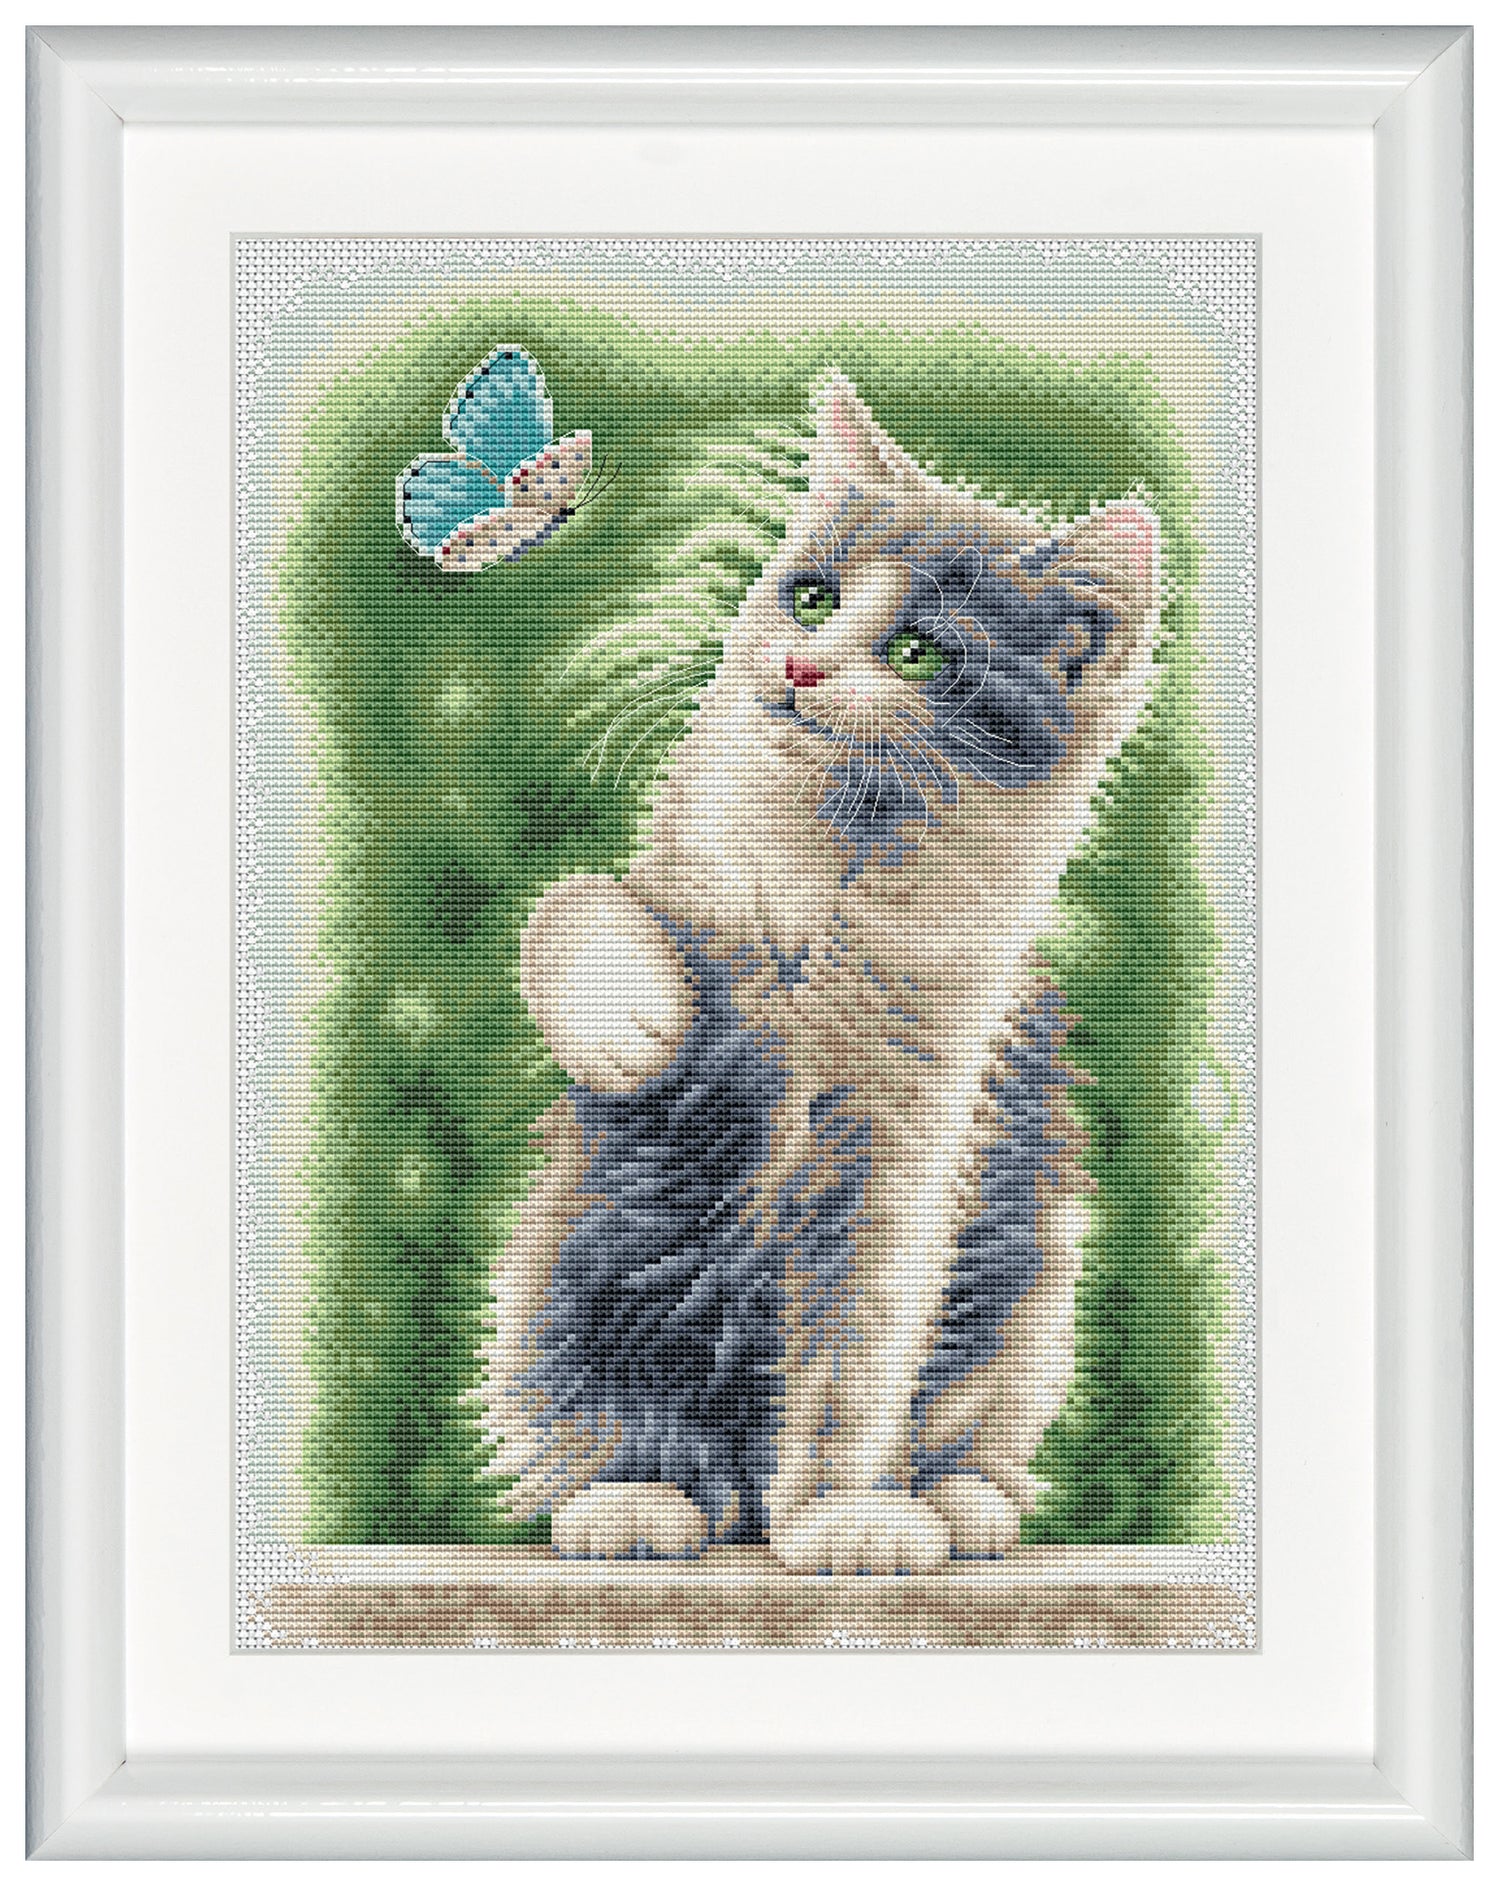 Enhance your embroidery skills with a well-assorted kit that features a cat and butterfly design. Vibrant colors, including shades of green, blue, and off-white represent this sweet moment of a furry cat being intrigued by the butterfly. DSB cross stitch kits have easy to follow design charts and contain all items needed to facilitate embroidery without hassle. To cater to both beginners as well as advanced stitching artists.